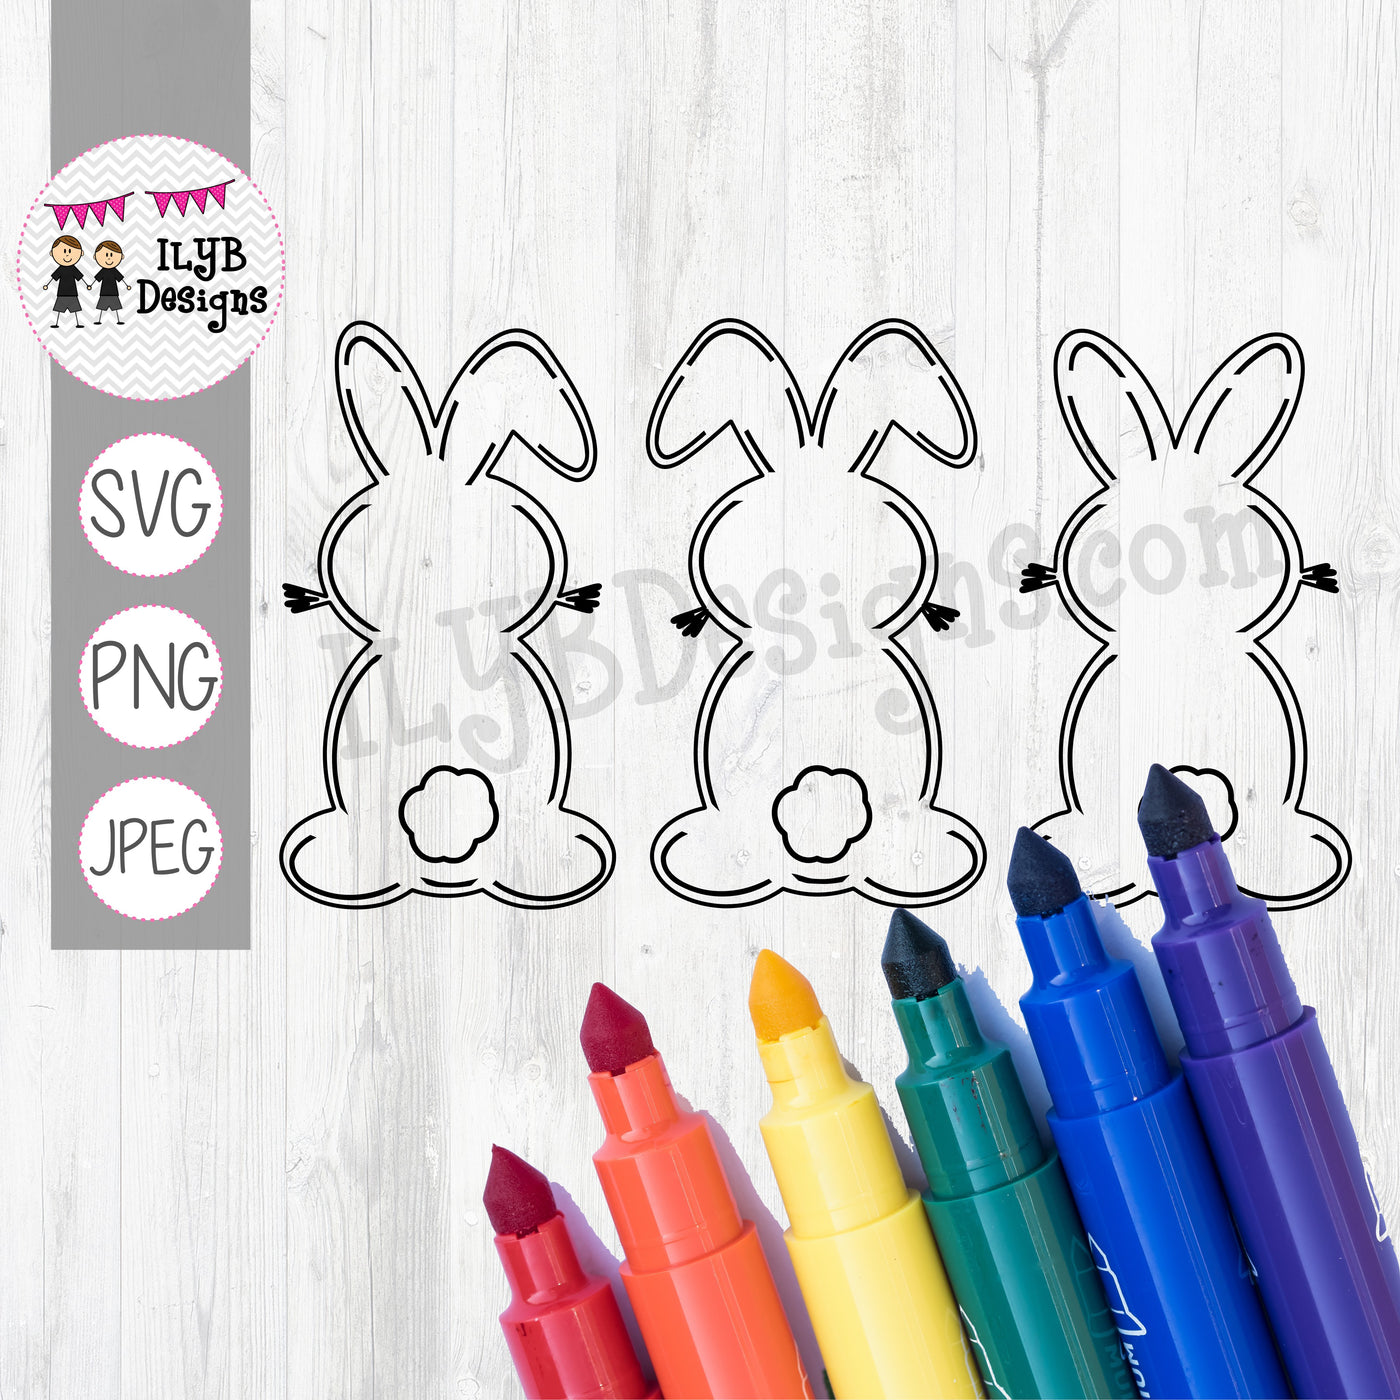 Bunny Butts Coloring Shirt SVG, PNG, JPEG Cutting Files - ILYB Designs